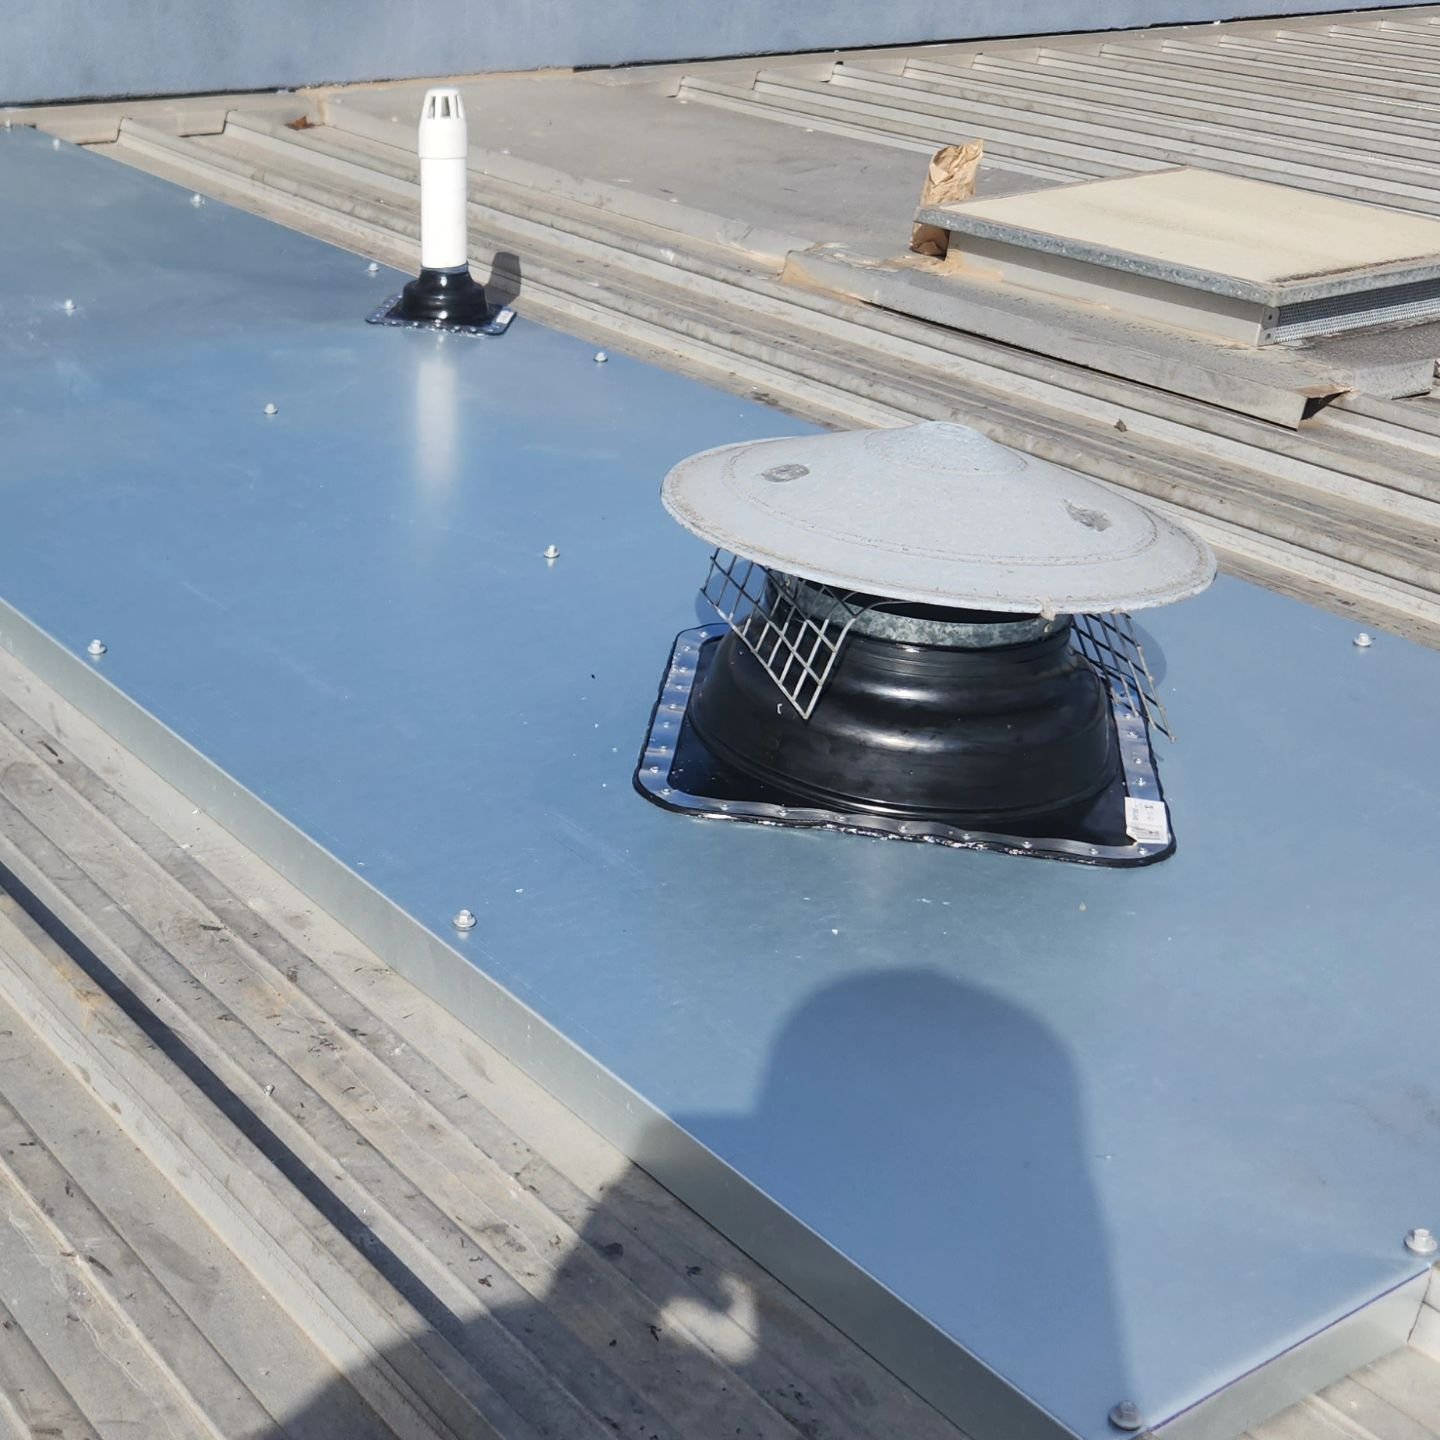 Leaking deck roof penetrations fixed with hopper flashings to prevent water pooling and ingress into building. Get your roof leaks fixed before winter hits!